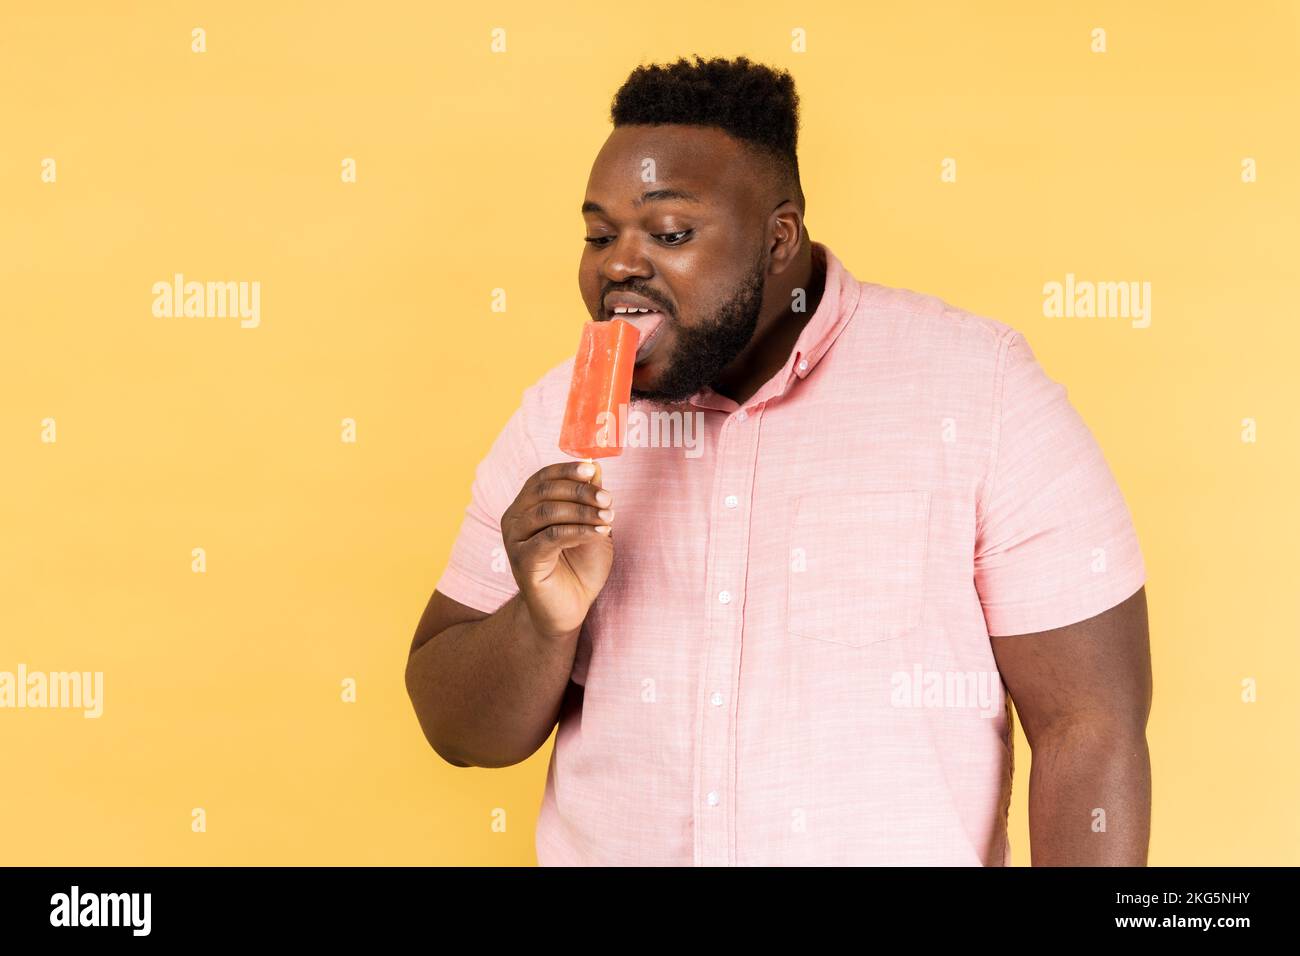 Portrait of positive optimistic man wearing pink shirt holding licking sweet ice cream, trying delicious confectionery dessert. Indoor studio shot isolated on yellow background. Stock Photo